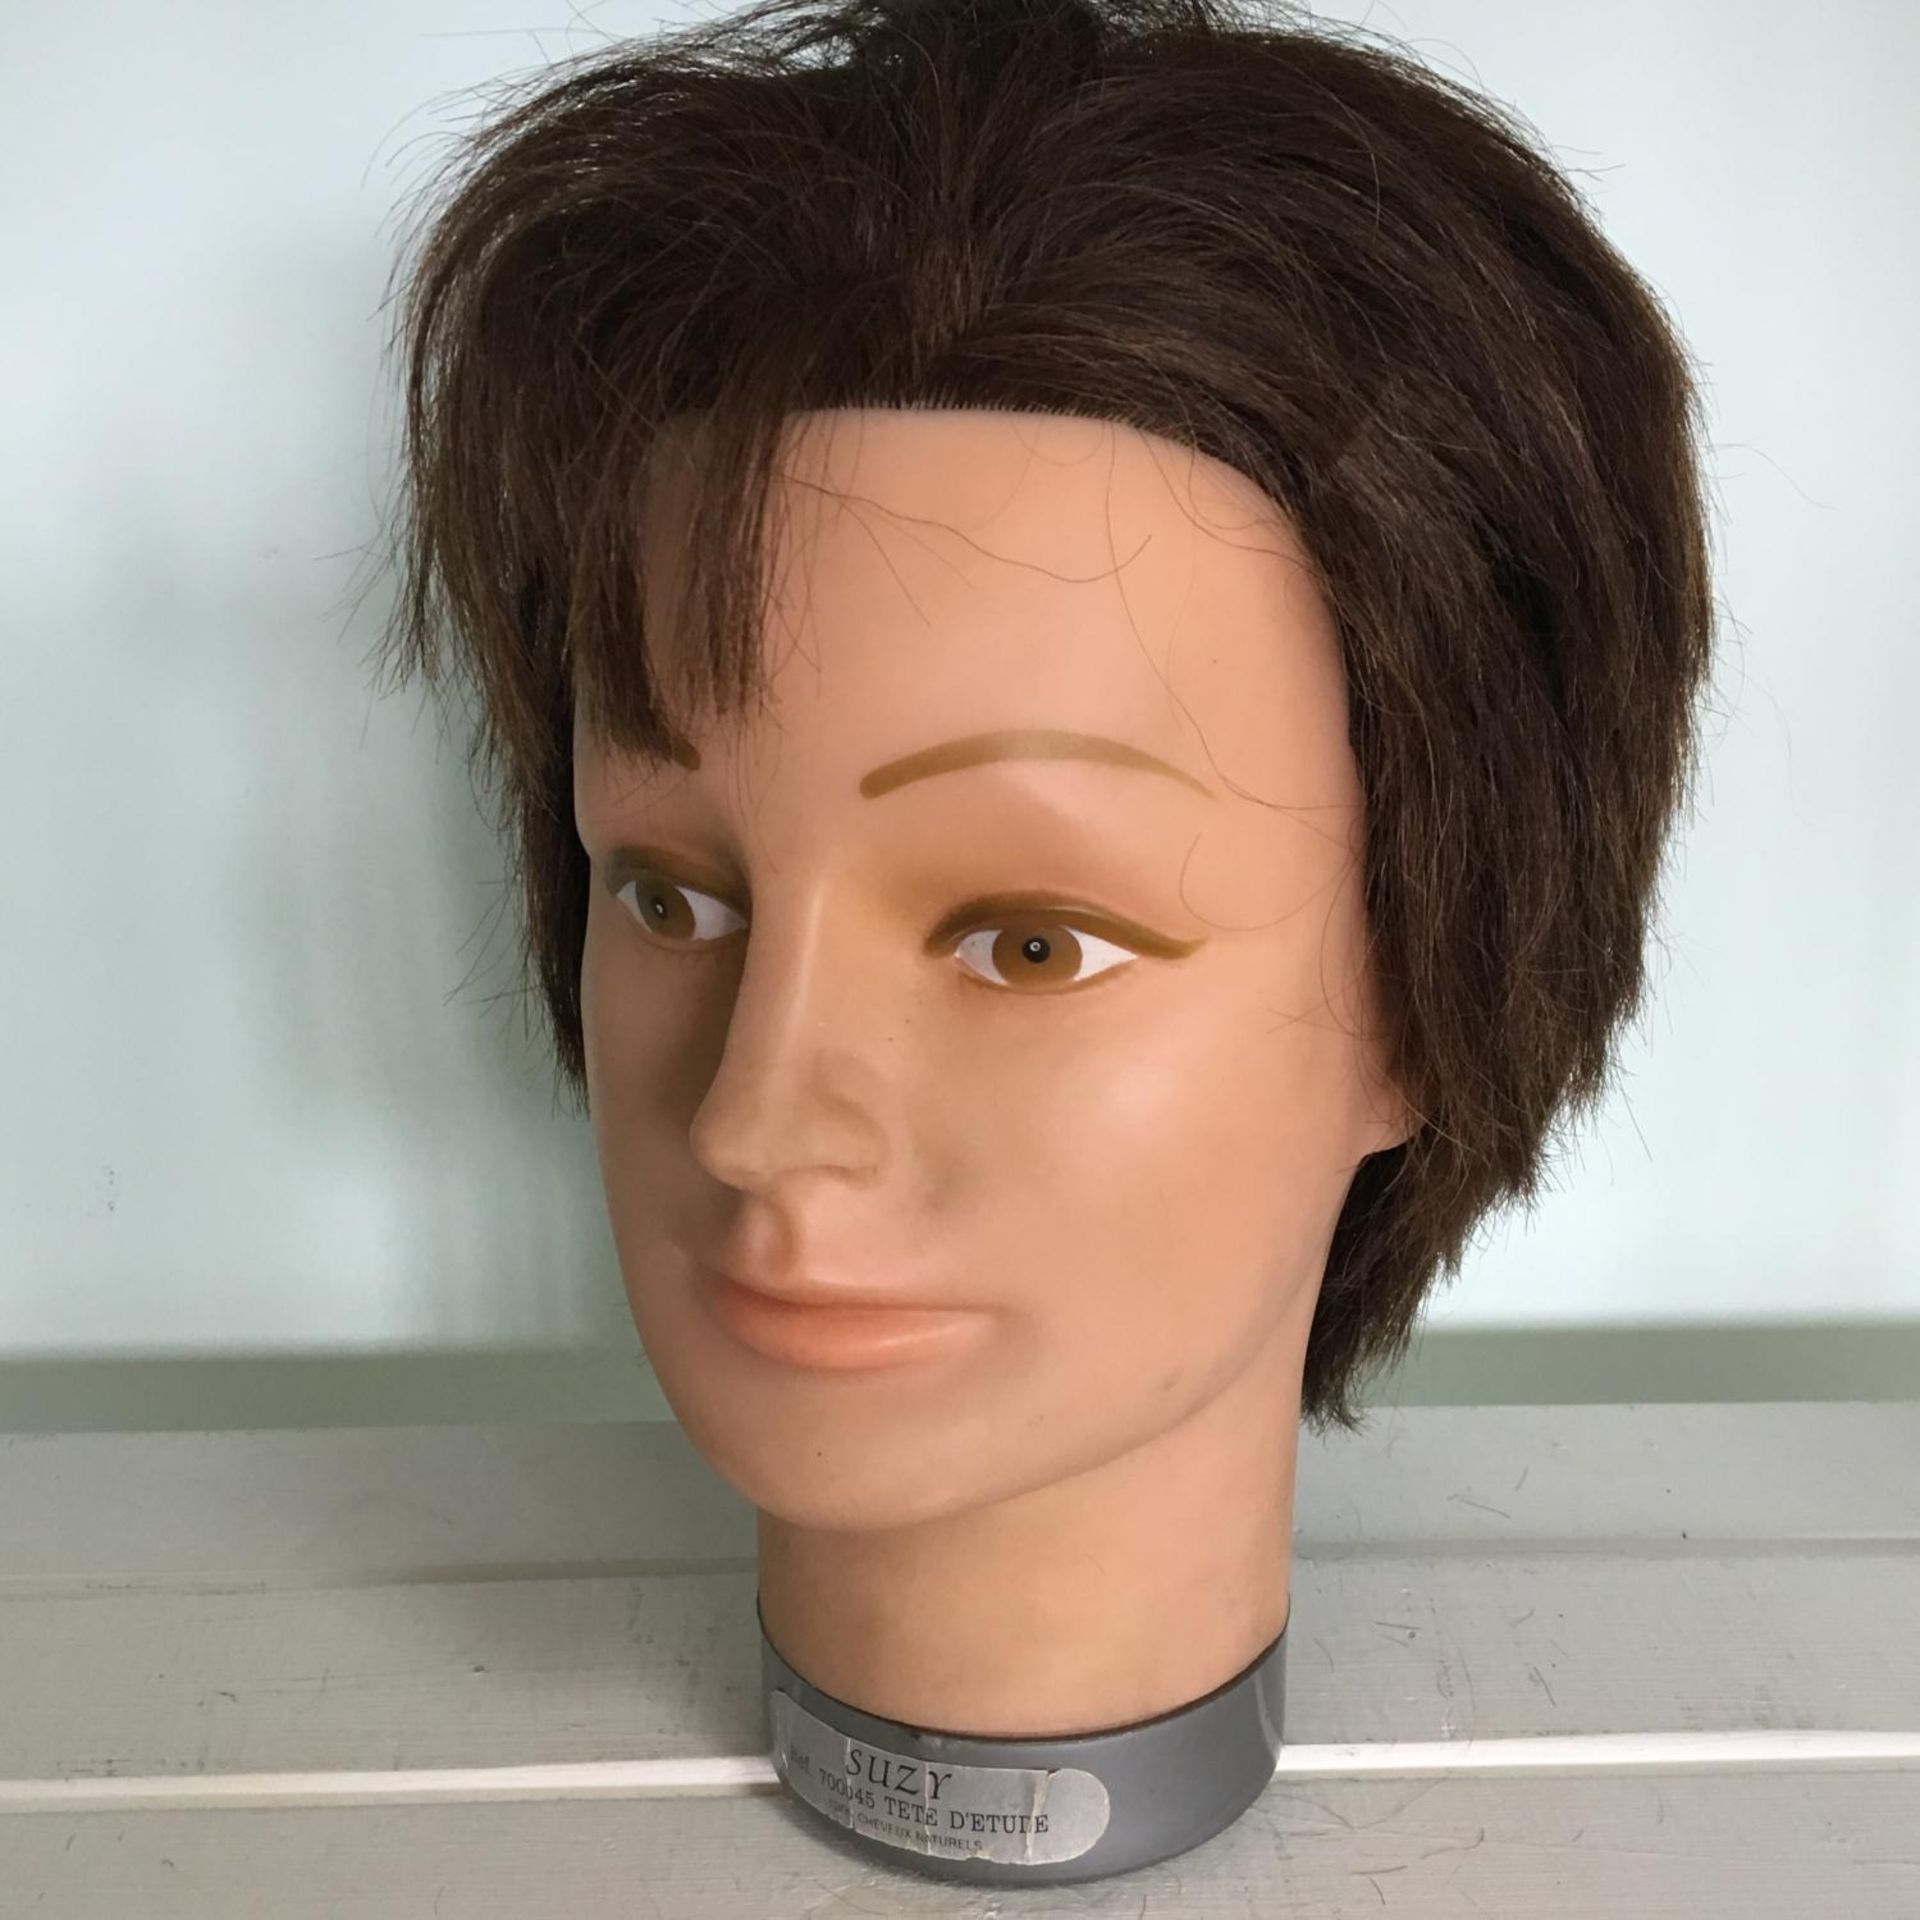 Vintage display model head with real hair. Includes free UK delivery.